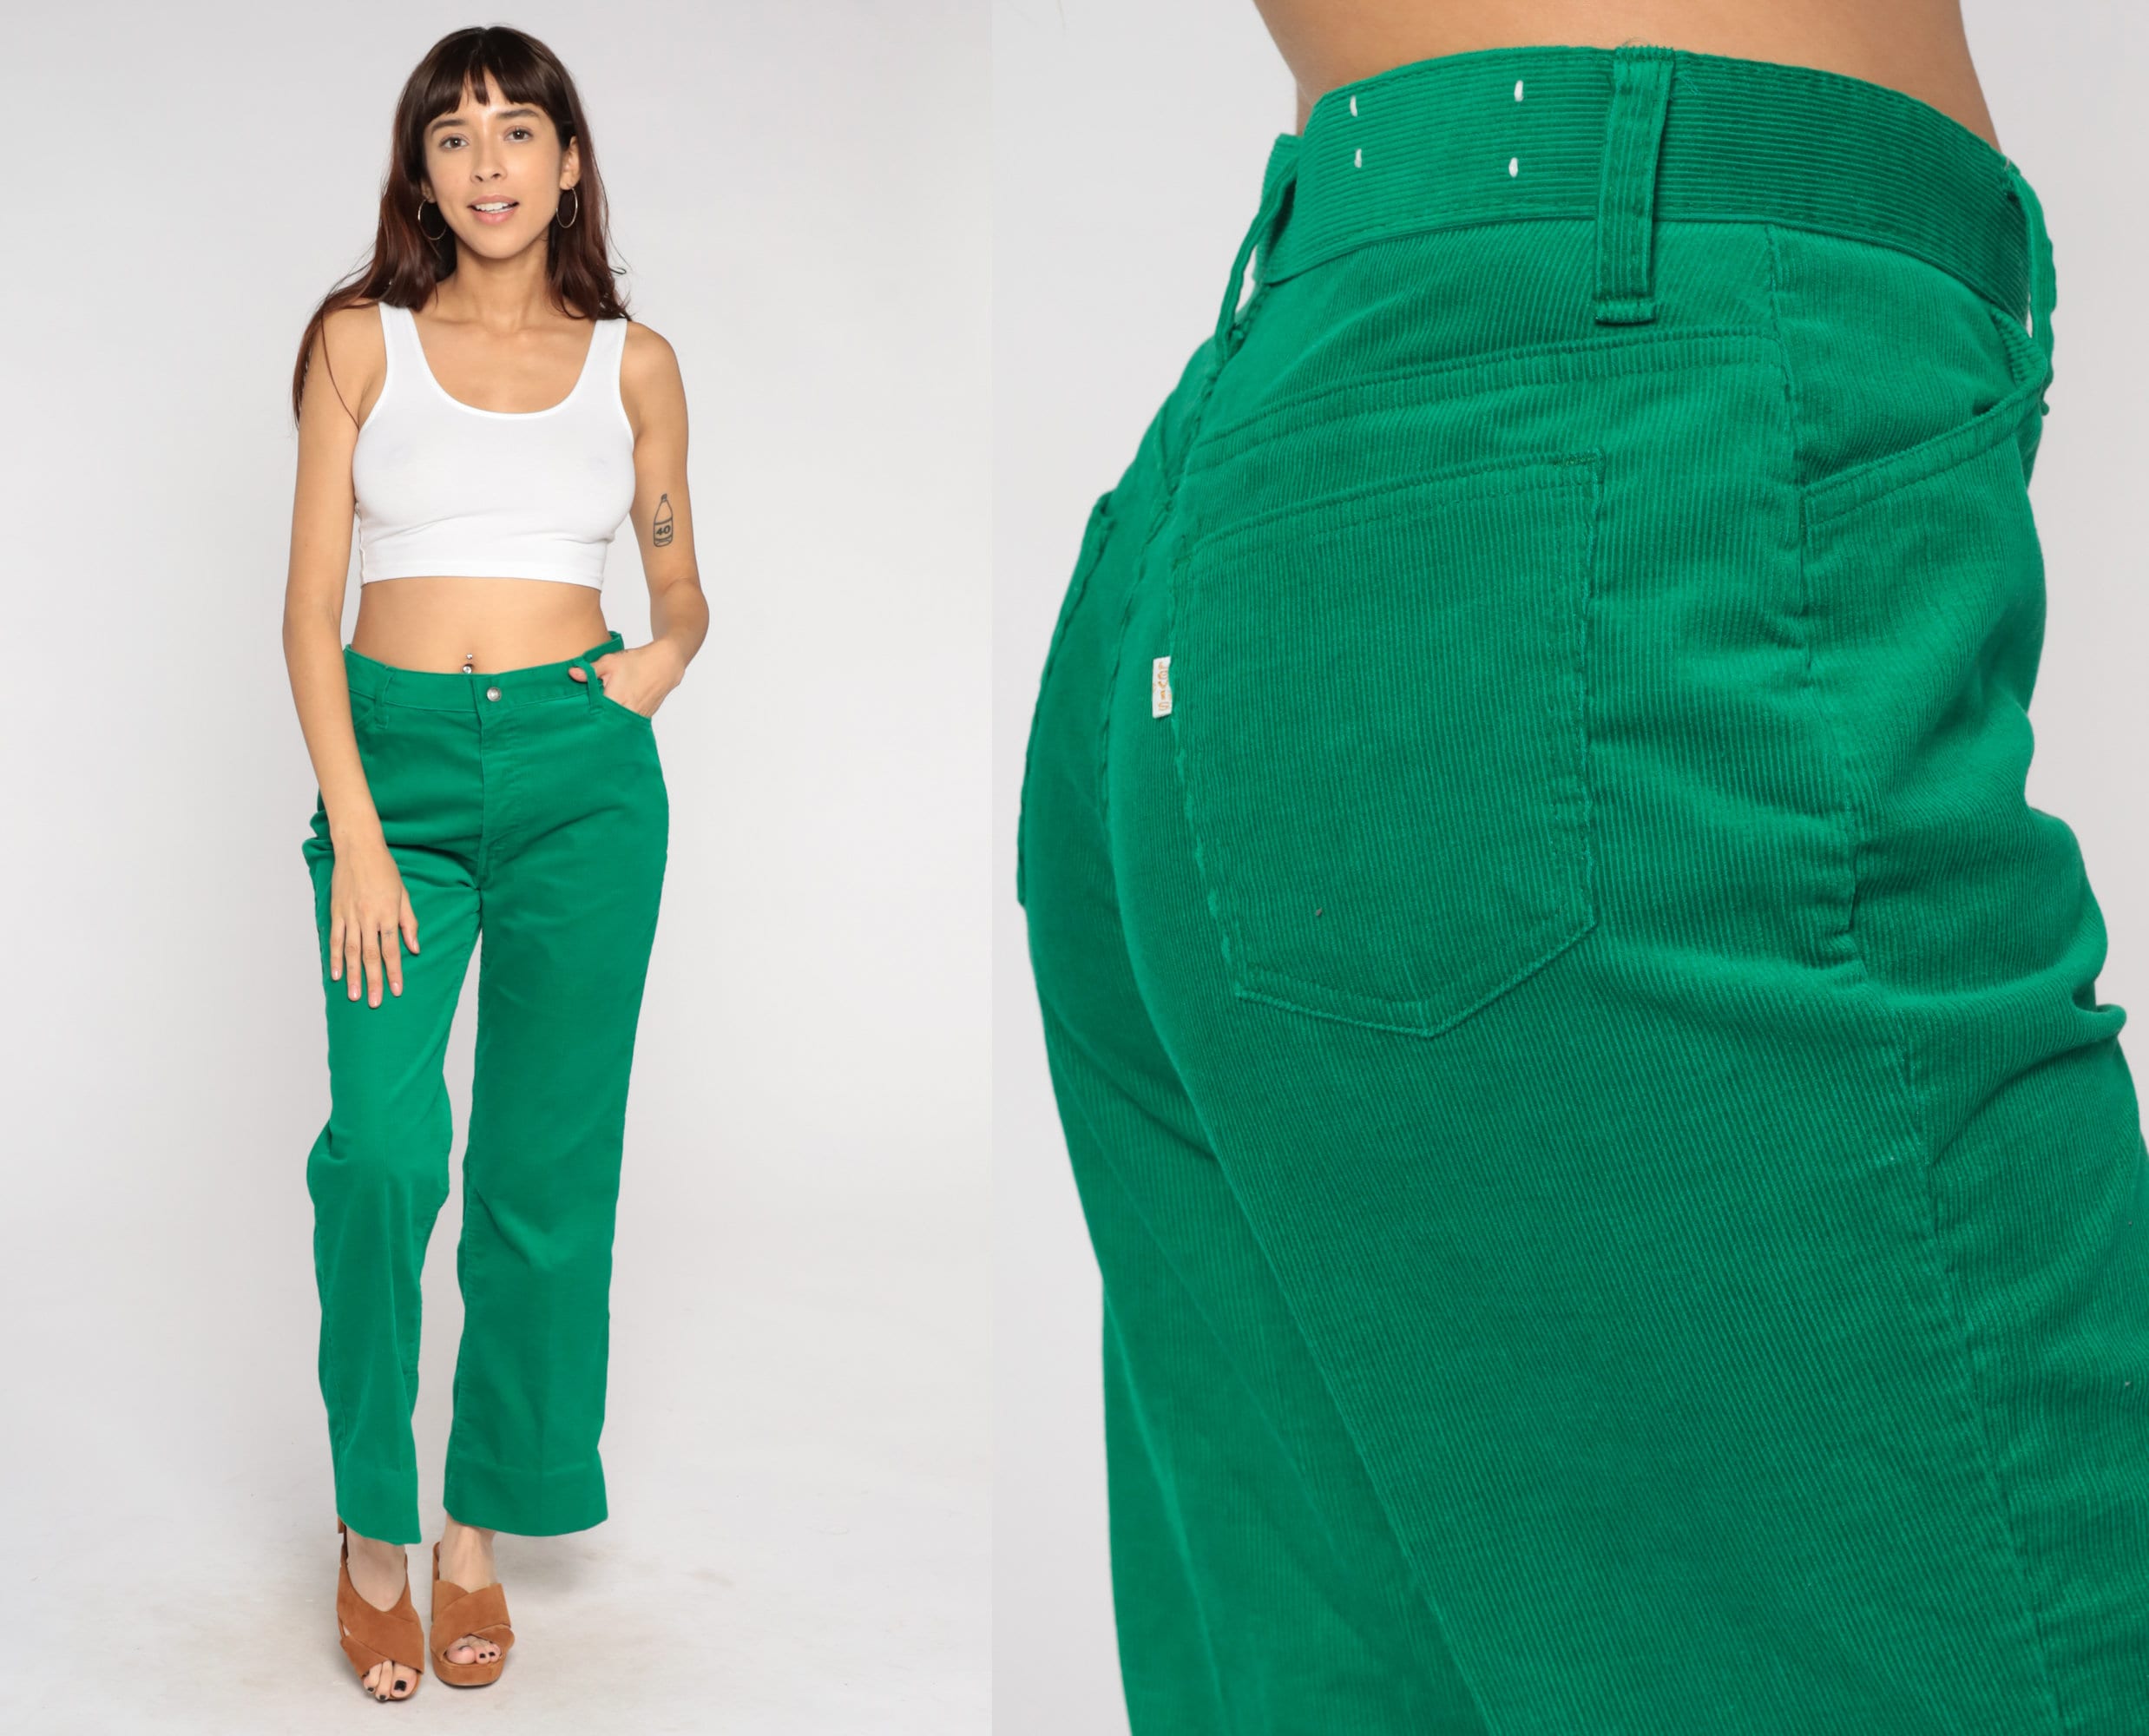 Levis Corduroy Pants 80s Green Flared Trousers Retro Cords - Etsy Sweden